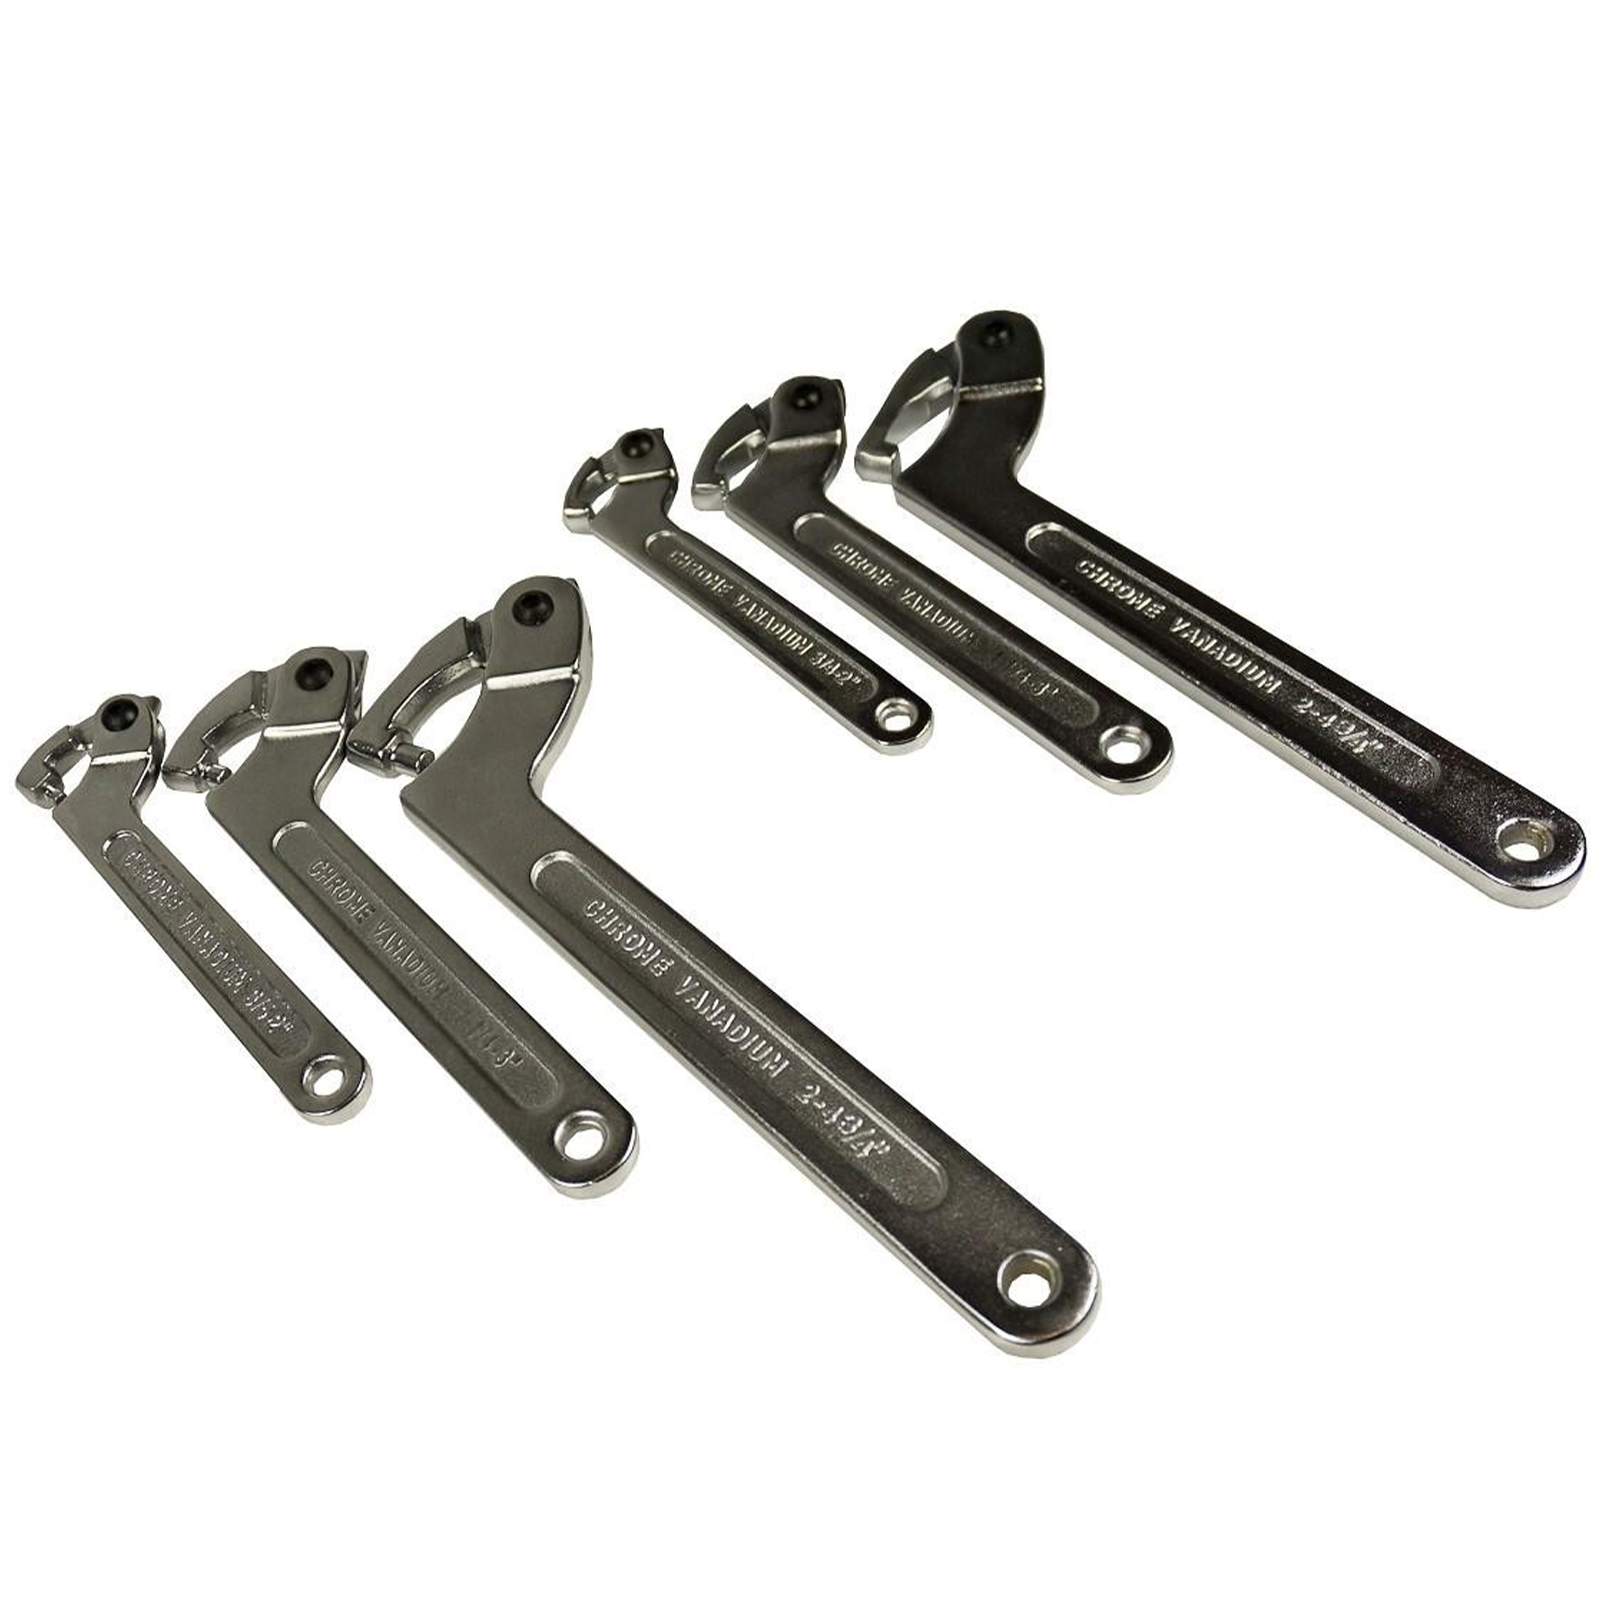 Adjustable Hook & Pin Wrench C Spanner Tool Set 6pc